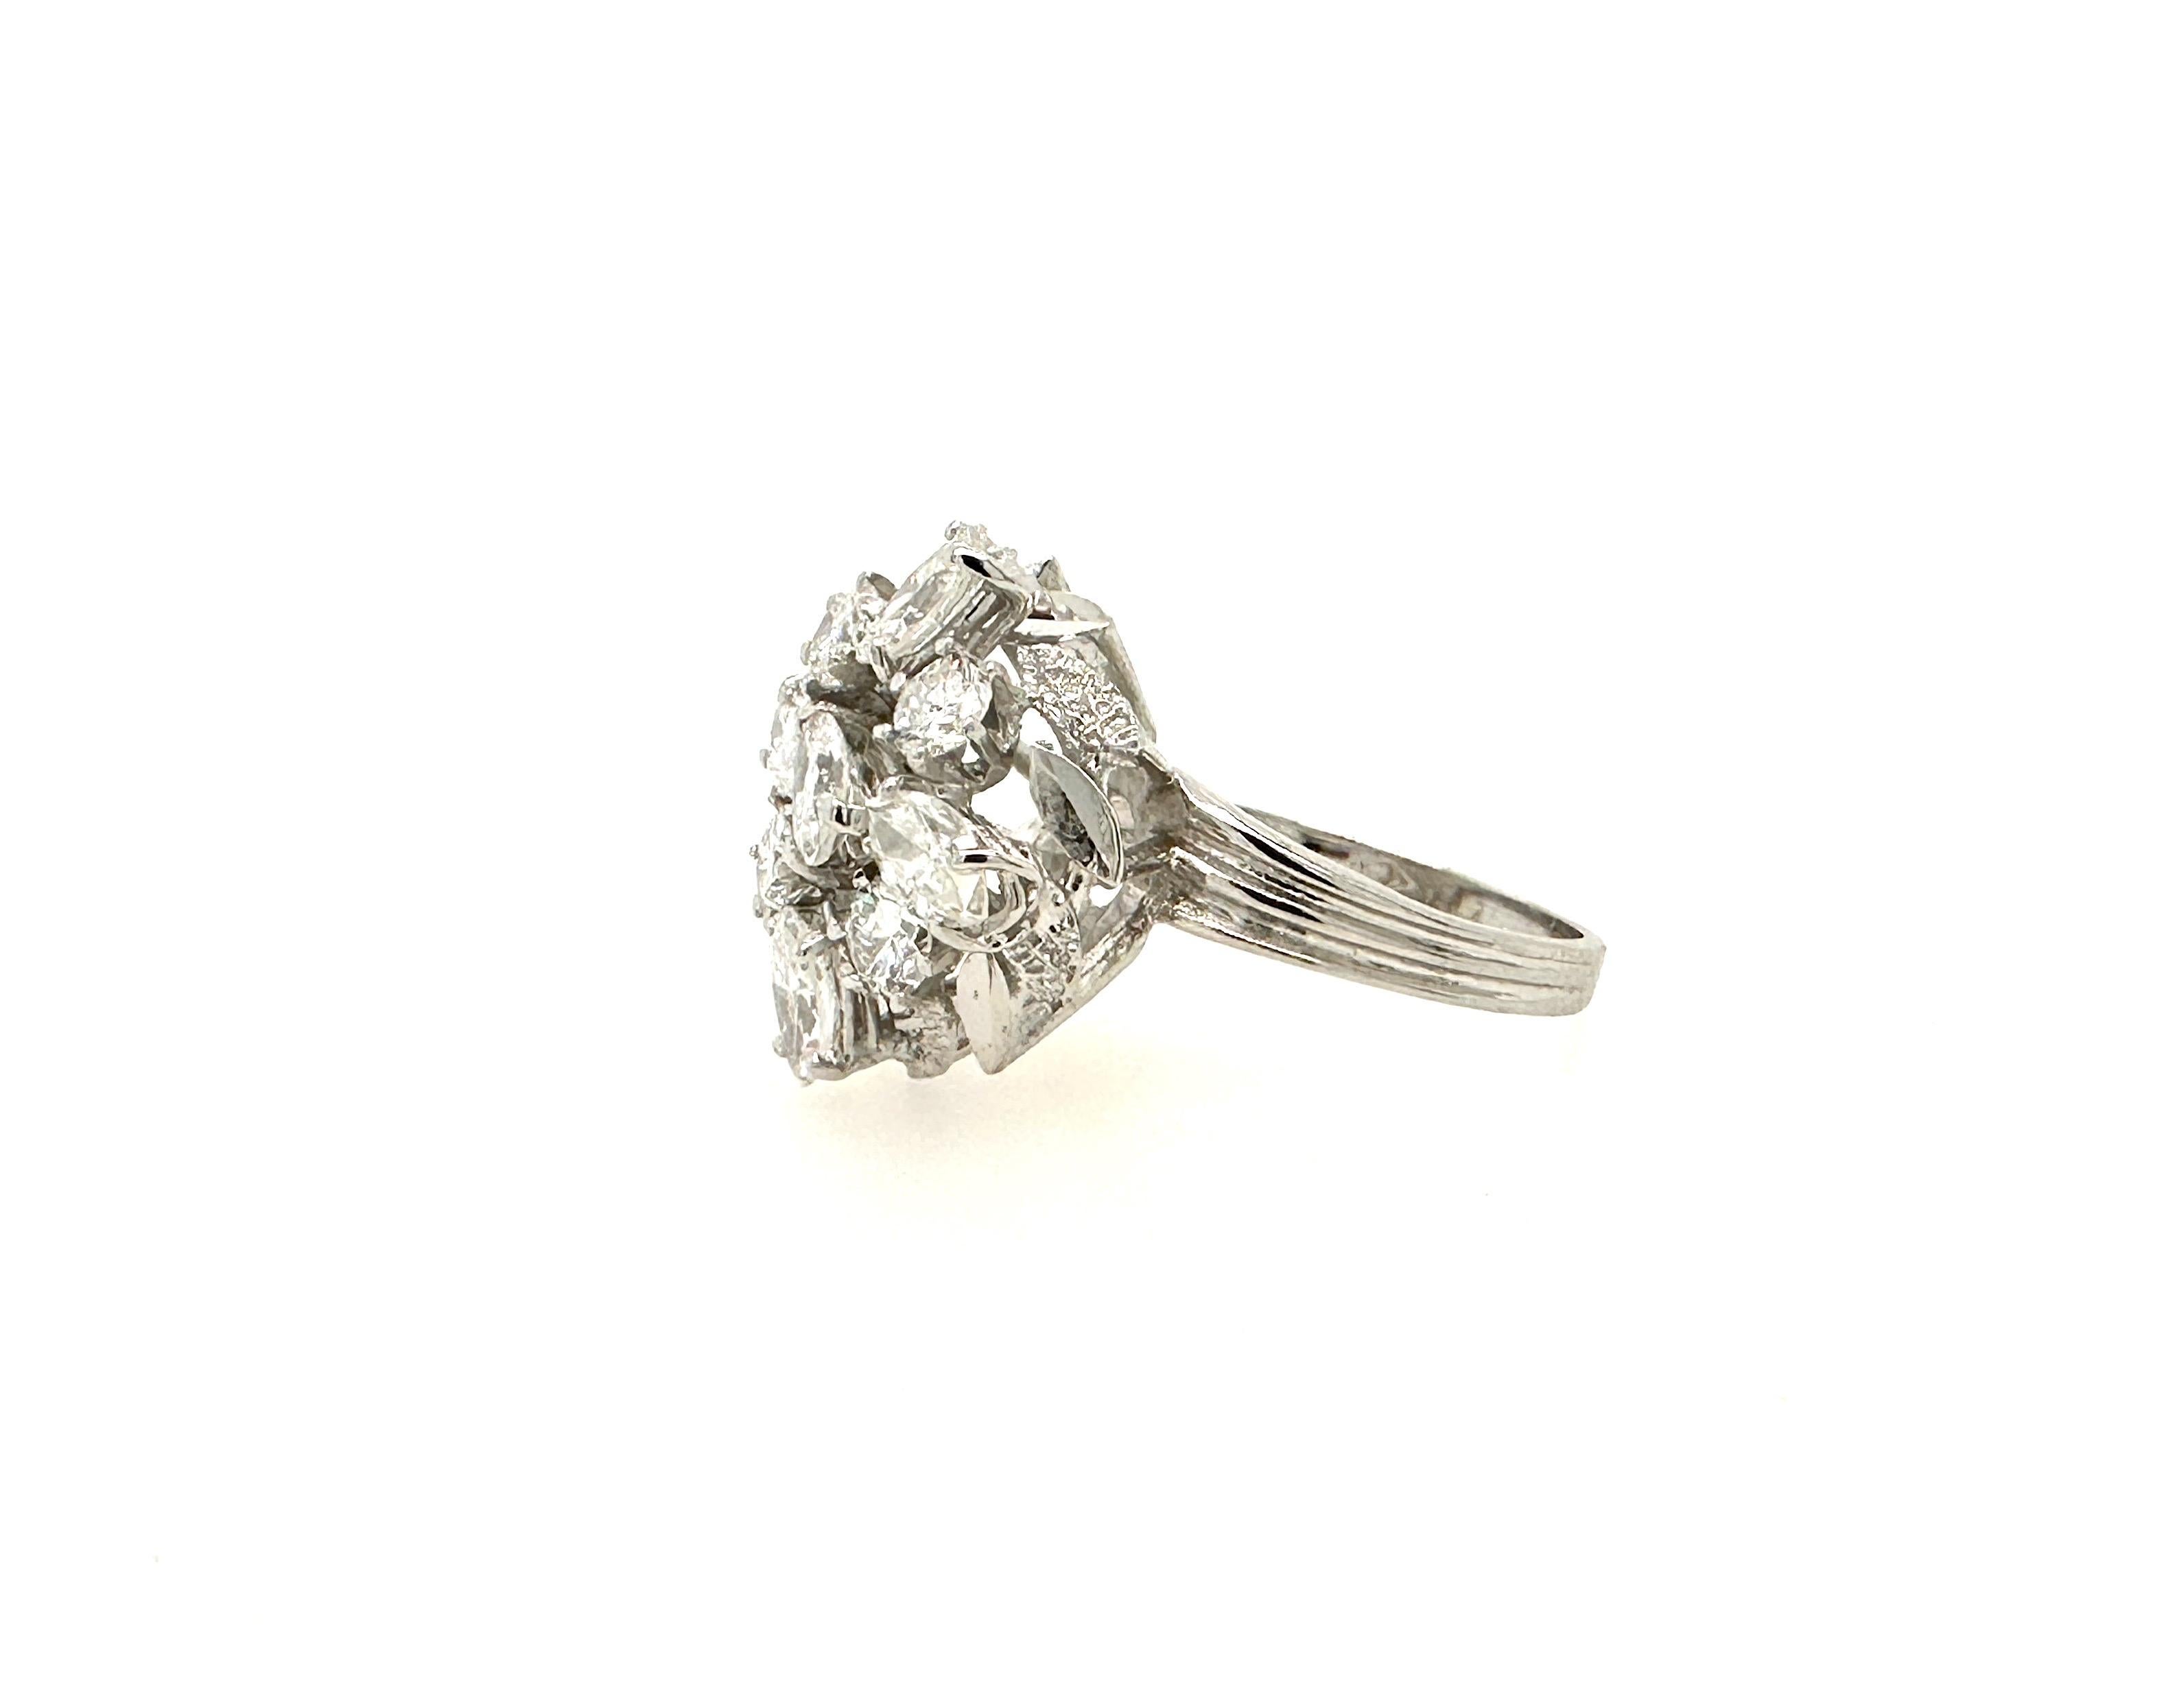 This beautiful cocktail ring is made with 3 different shapes of diamonds : Marquise, Pear and Rounds.
All diamonds are D-F in color and VS1 in clarity.
Perfect for everyday use or for a special occasion,